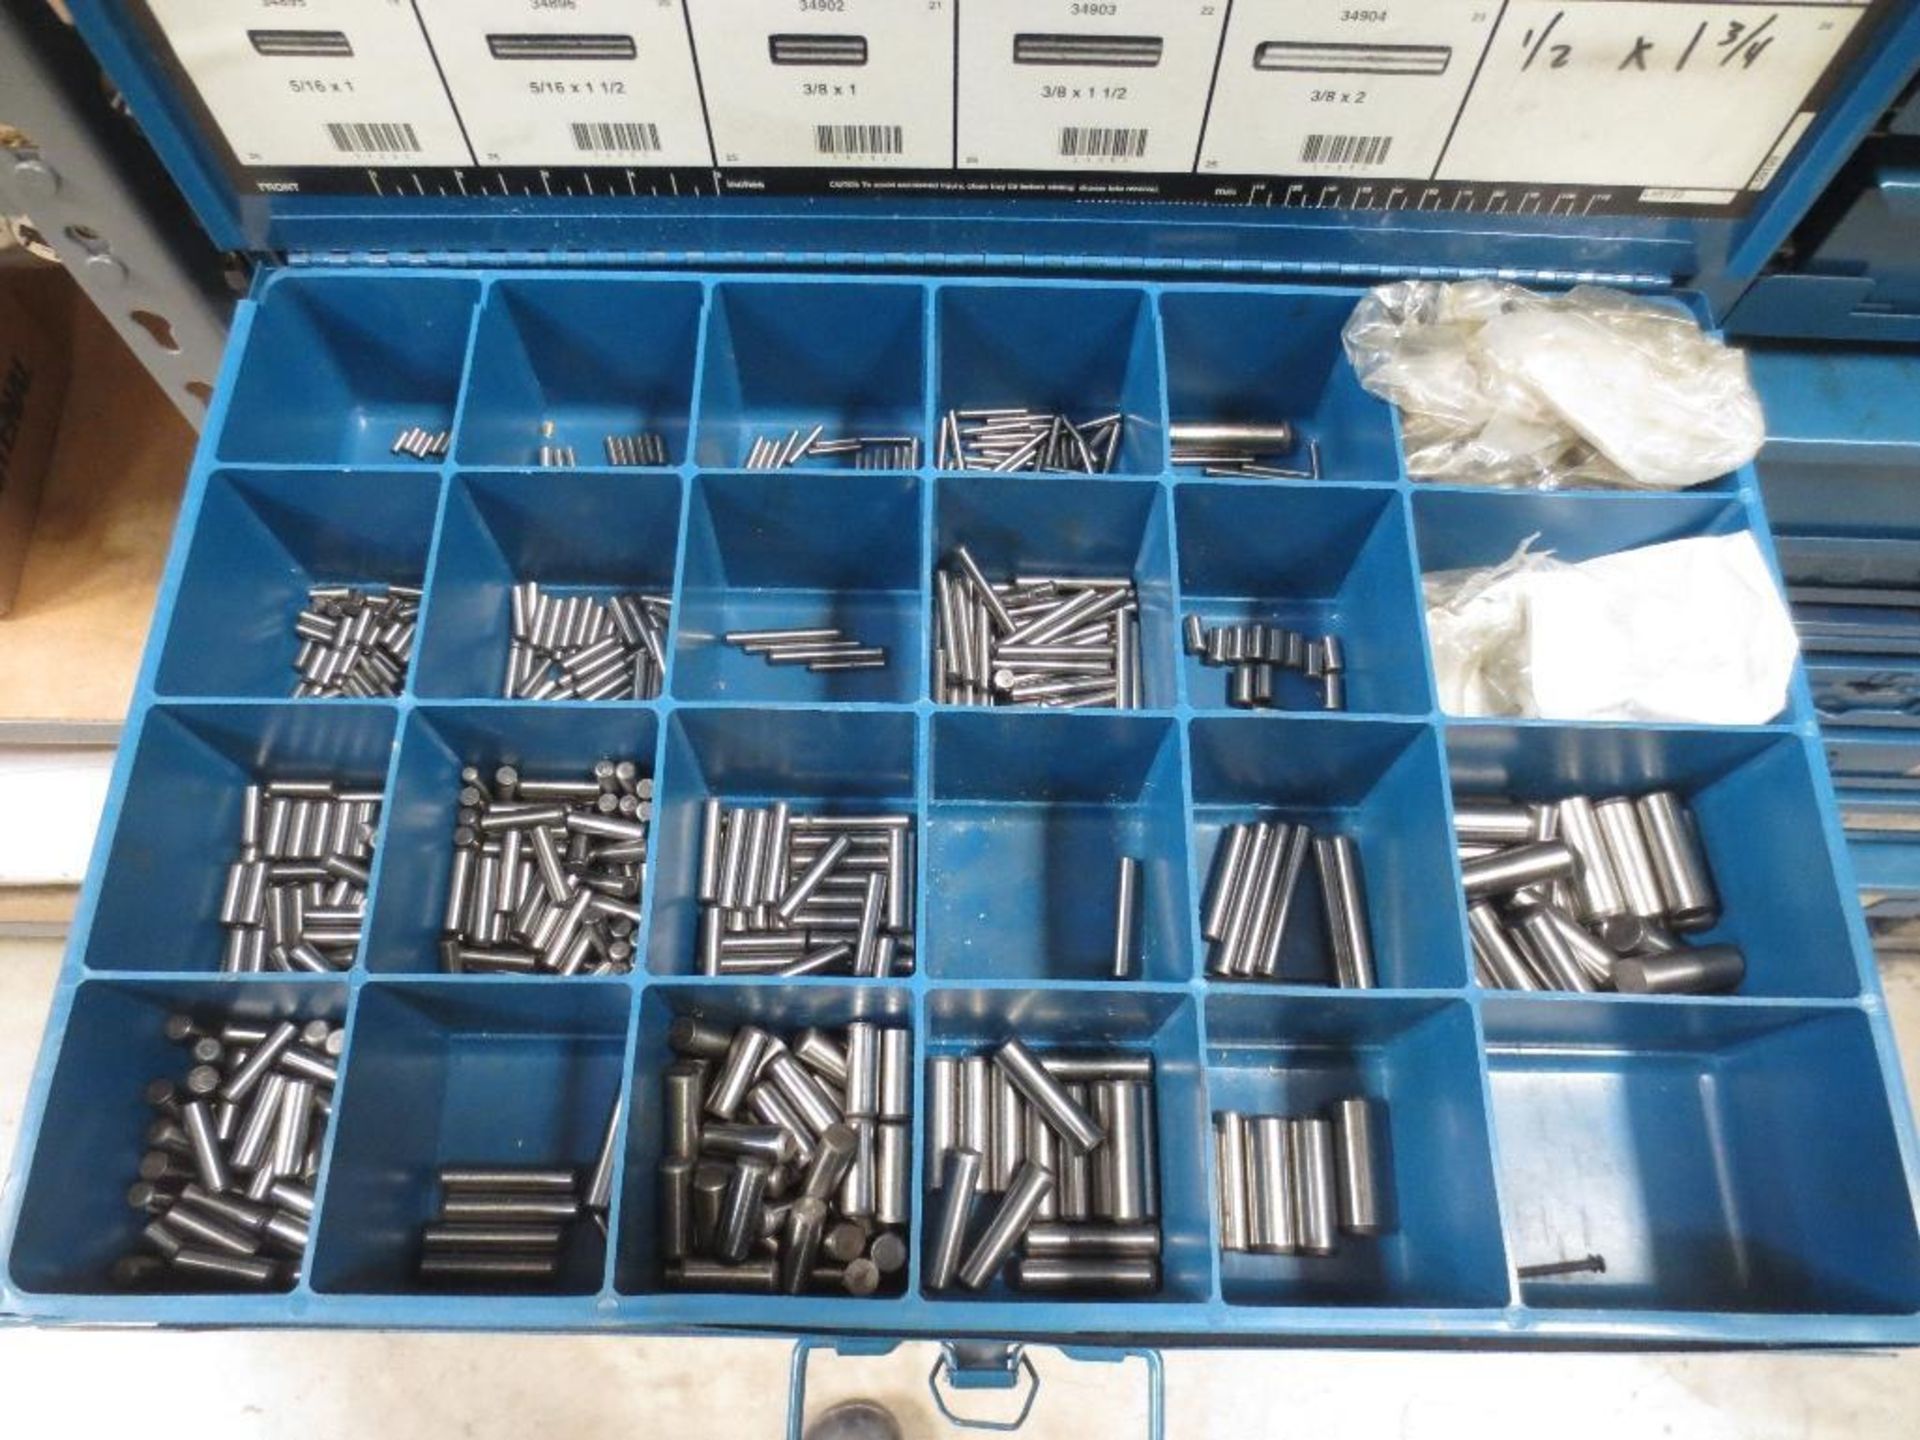 Two Five Drawer Compartment Cabinets With Misc. Contents Of Cotter Pins, Screws, Dowel Pins, Retaini - Image 4 of 11